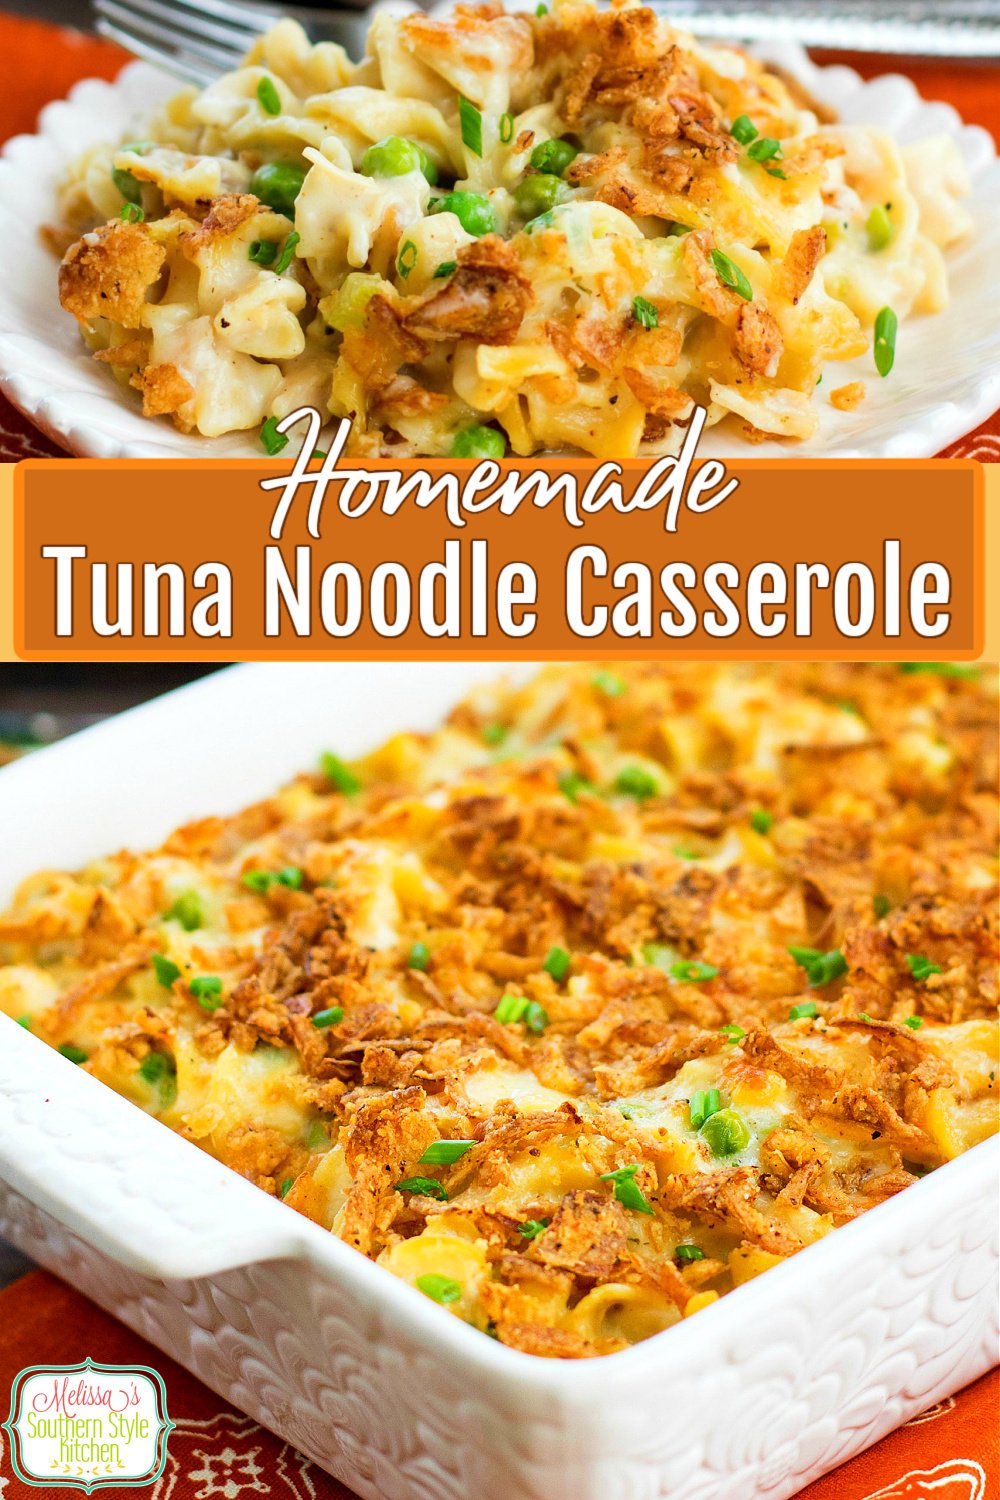 No canned soups needed to make this Homemade Tuna Noodle Casserole #tunacasserole #tunanoodlcasserole #casseroles #tunarecipes #seafood #casserolerecipes #pasta #dinnerideas #dinner #southernfood #southernrecipes via @melissasssk